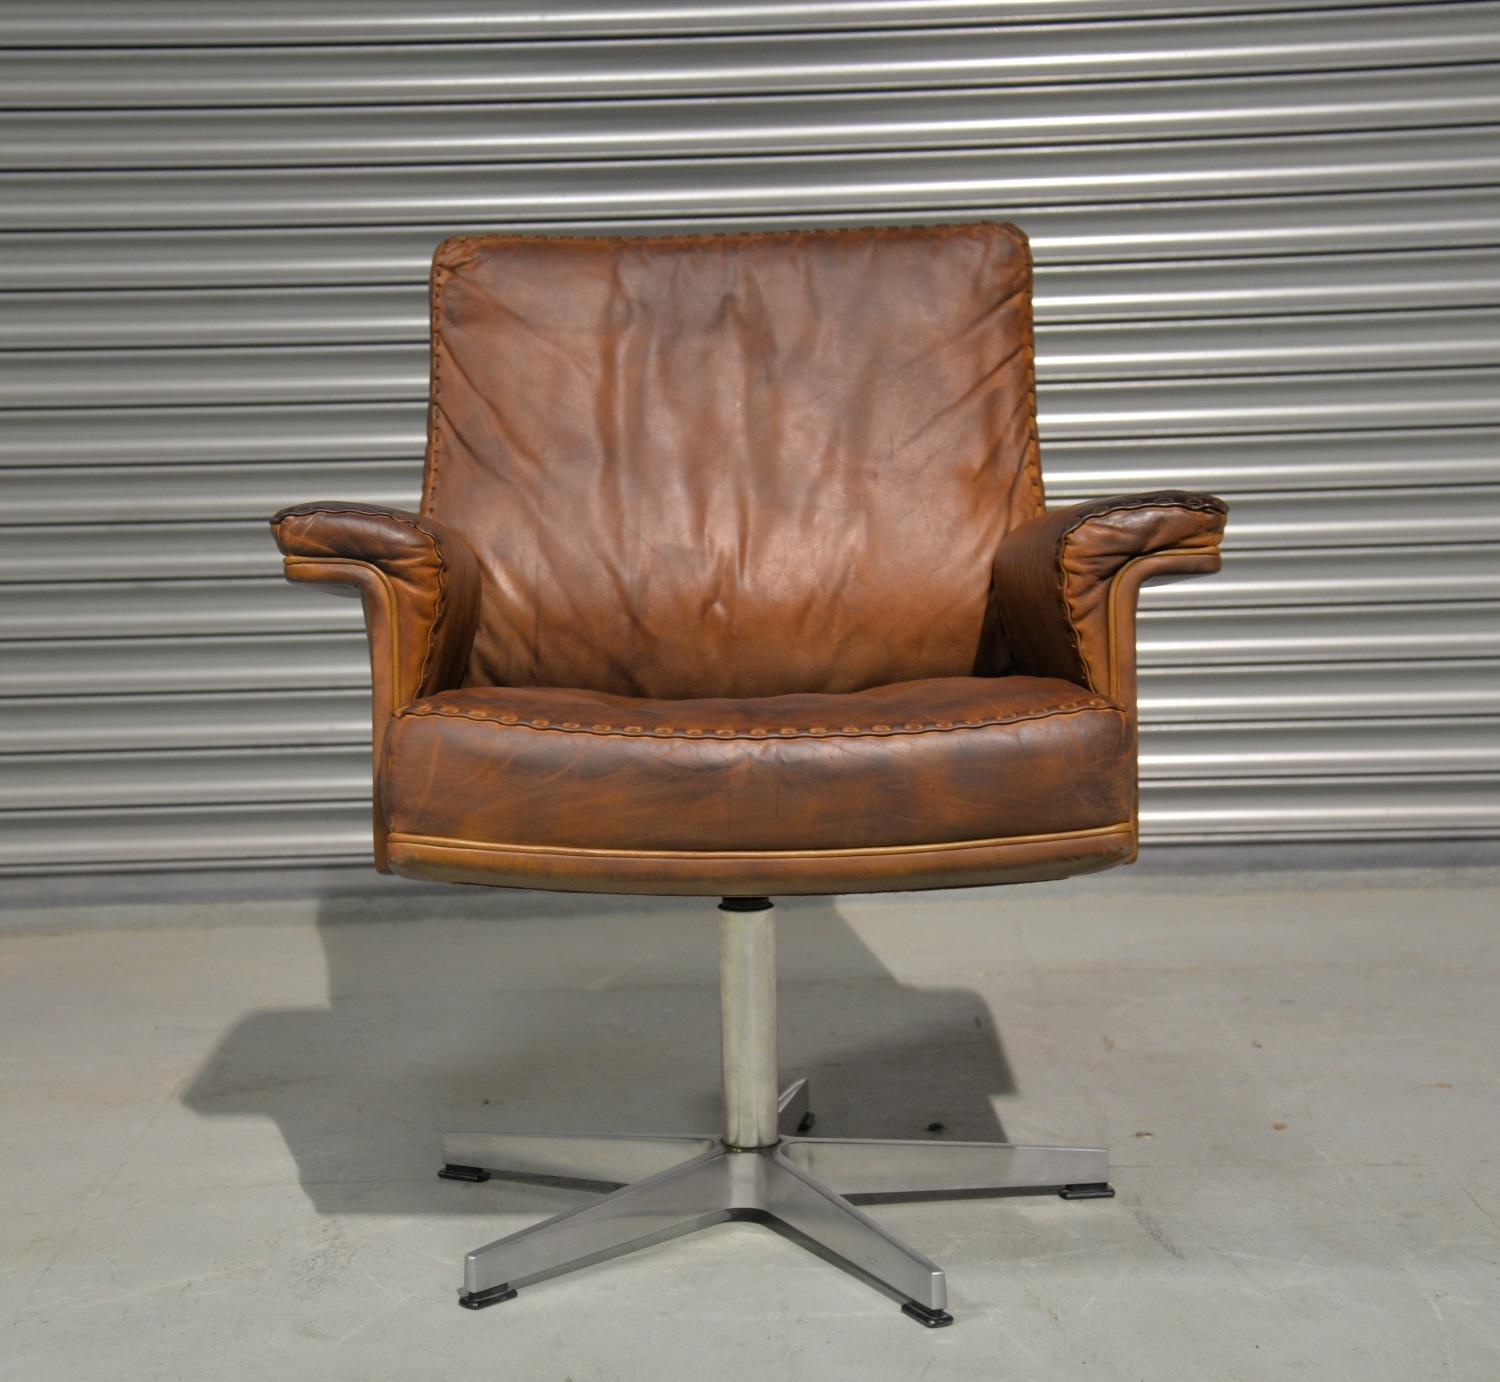 Discounted airfreight for our US and International customers ( from 2 weeks door to door)

We are delighted to bring to you an extremely rare vintage de Sede DS 35 executive swivel armchair. Hand built in the 1960`s to incredibly high standards by